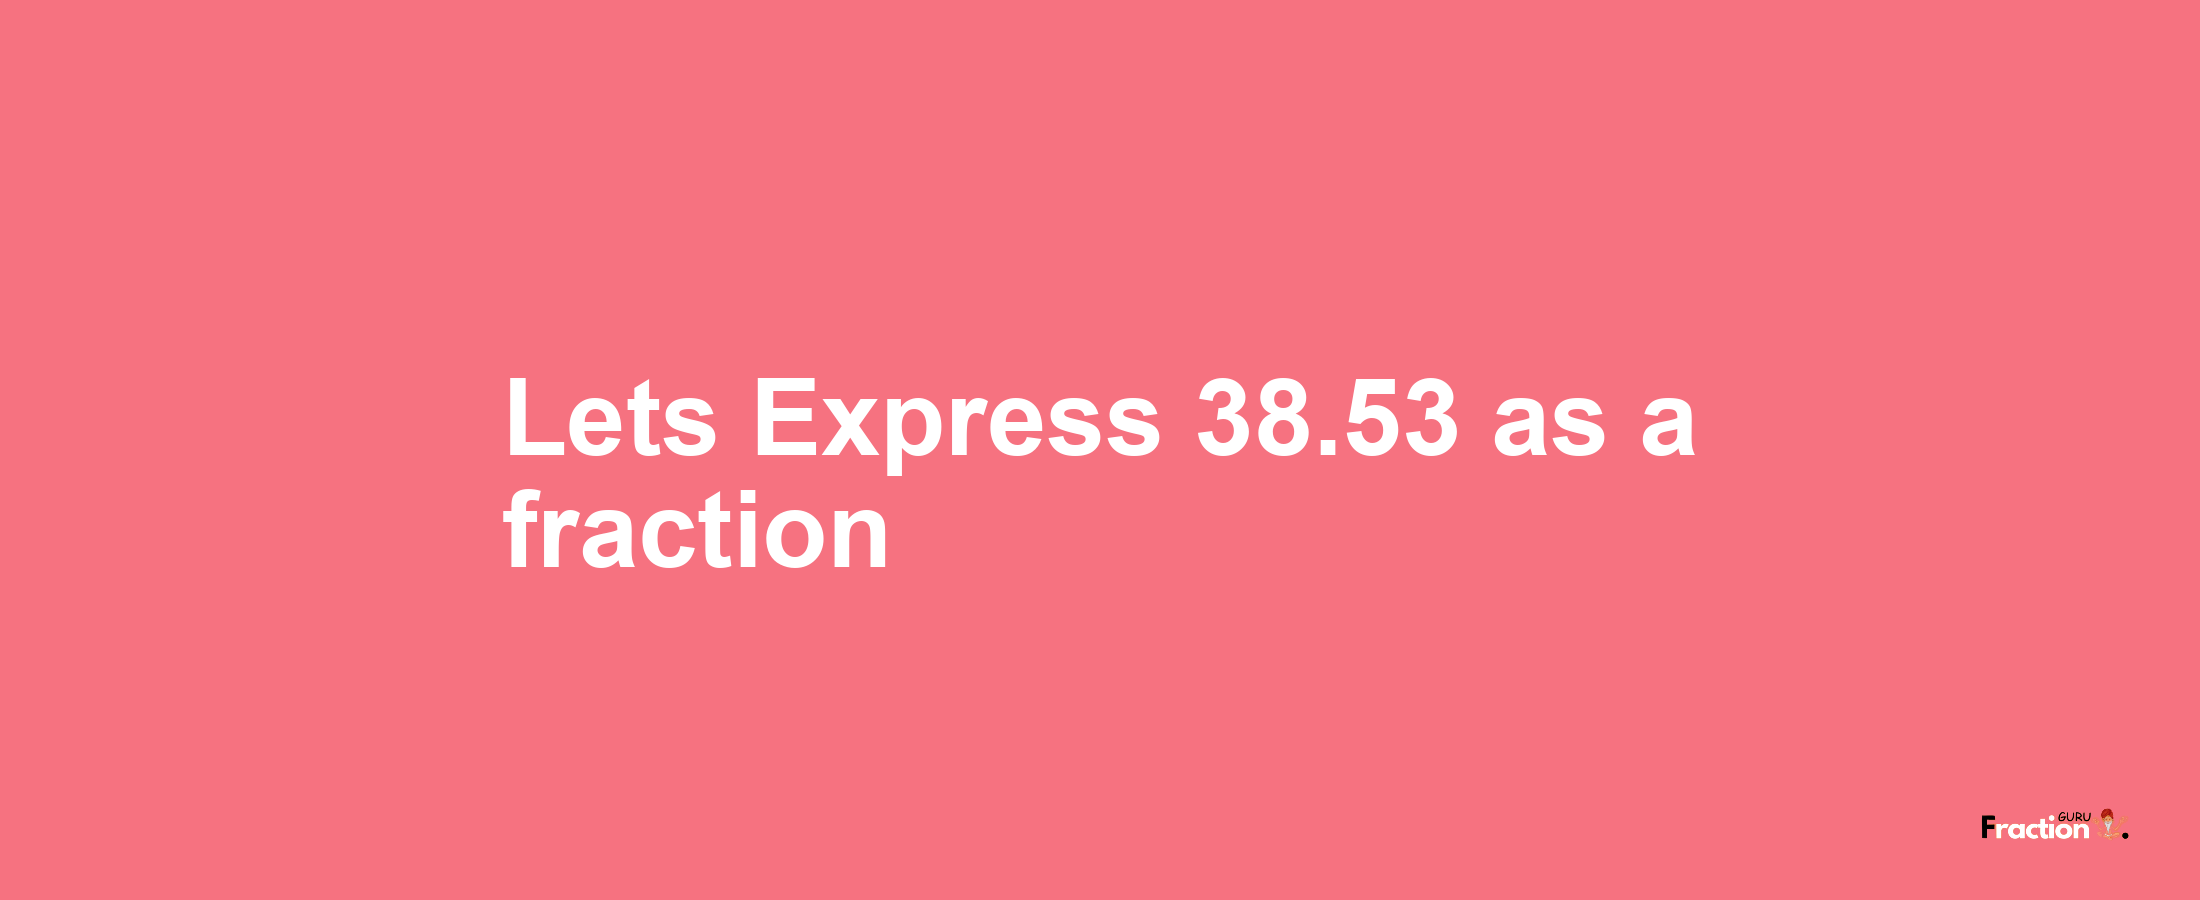 Lets Express 38.53 as afraction